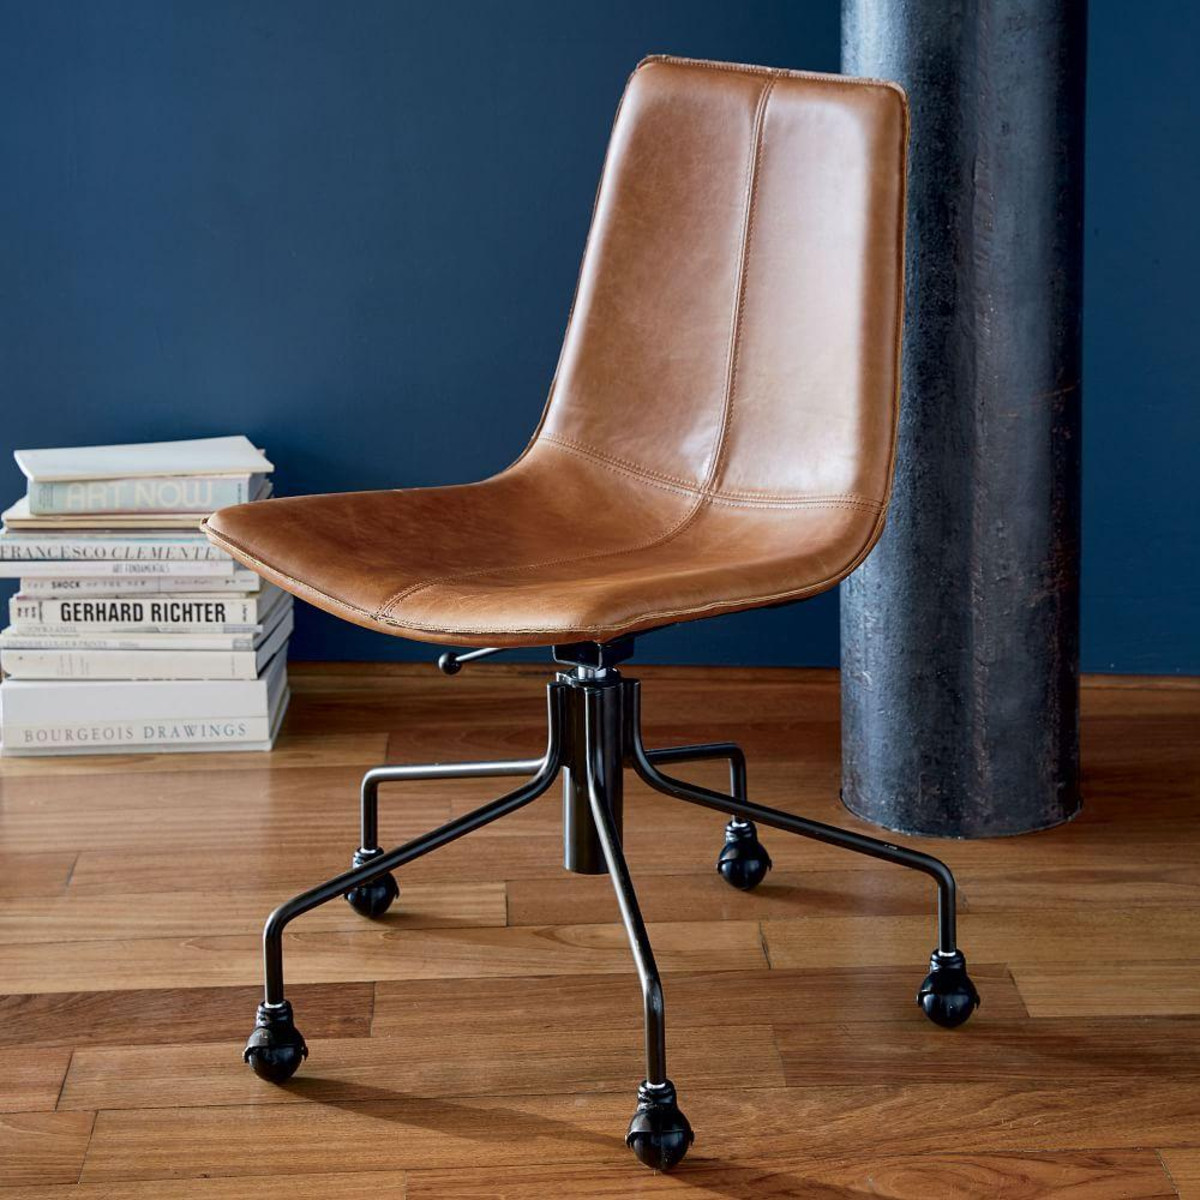 6 stylish office chairs (yes, they exist!) - The Interiors Addict